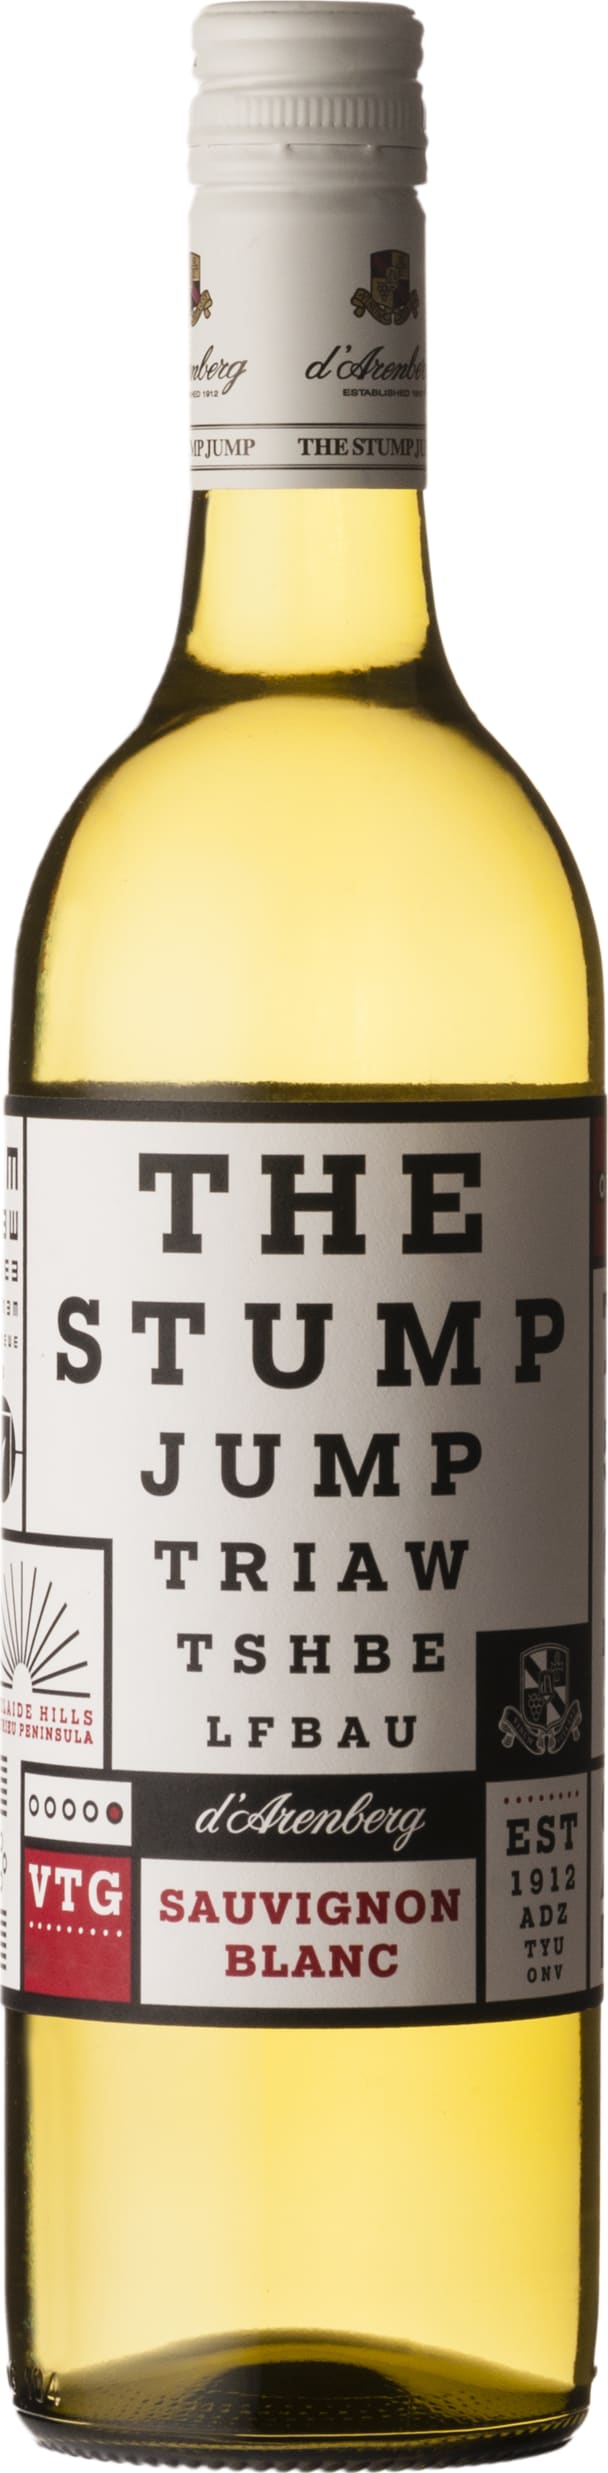 Stump Jump Sauv Blanc 23 d'Arenberg 75cl - Buy D Arenberg Wines from GREAT WINES DIRECT wine shop